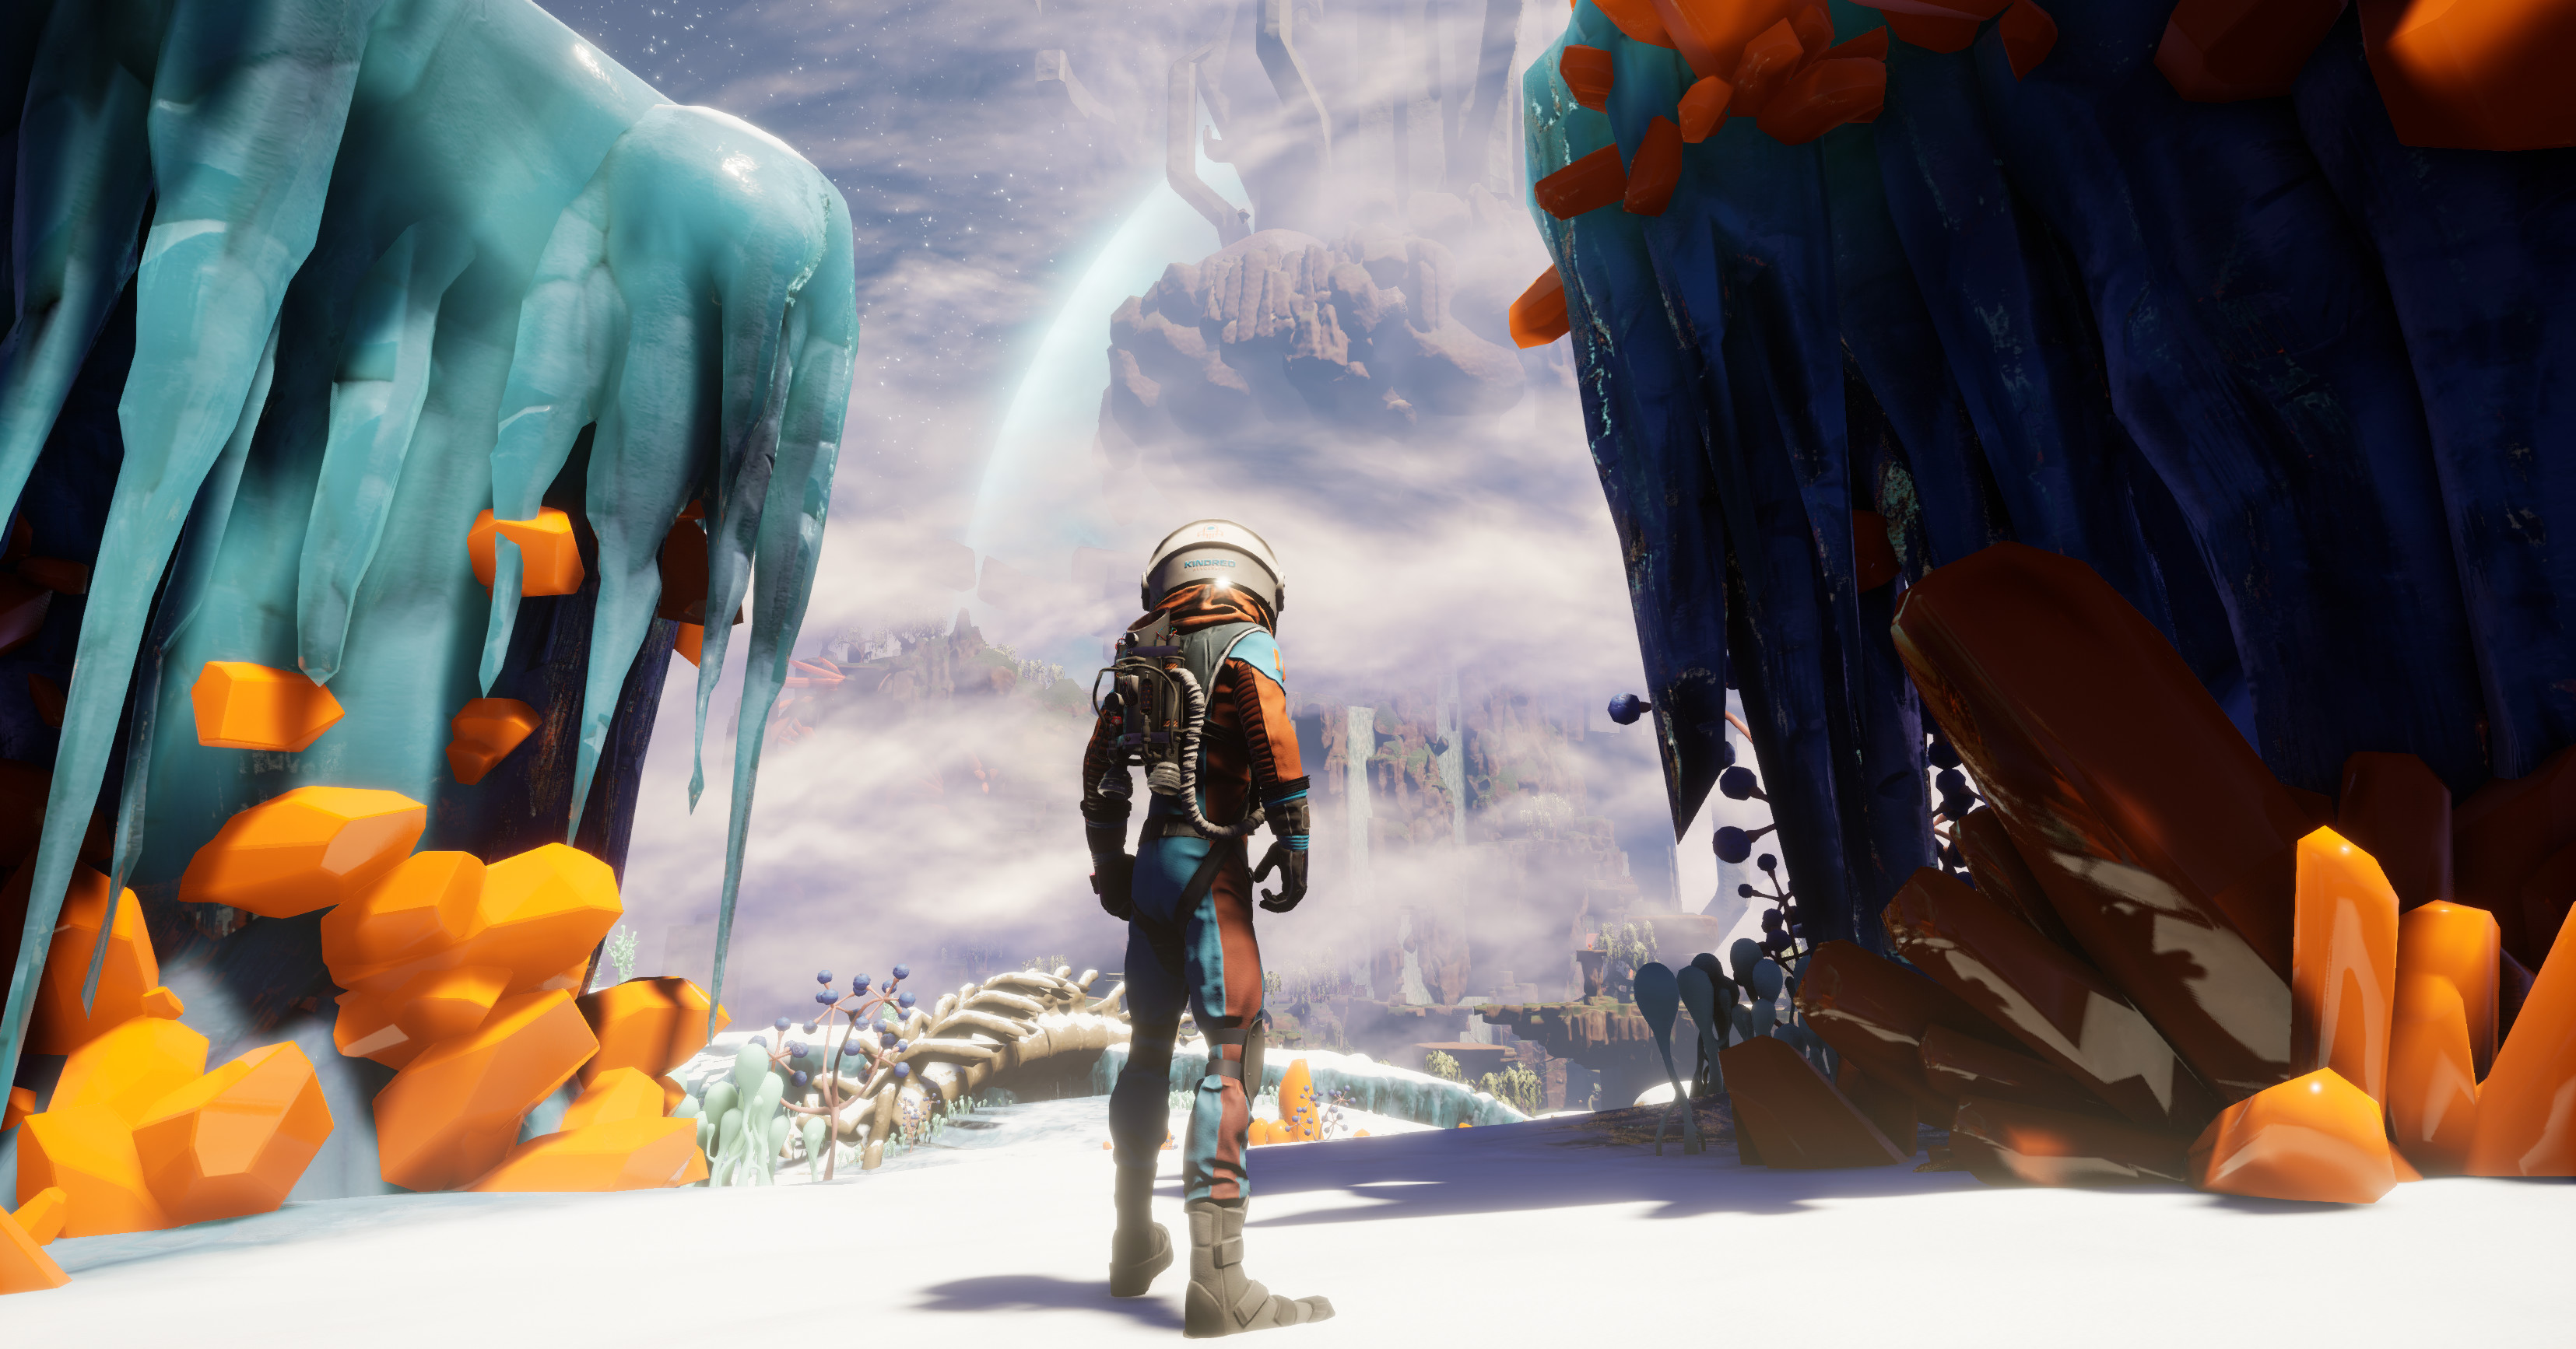 Journey To The Savage Planet screenshot